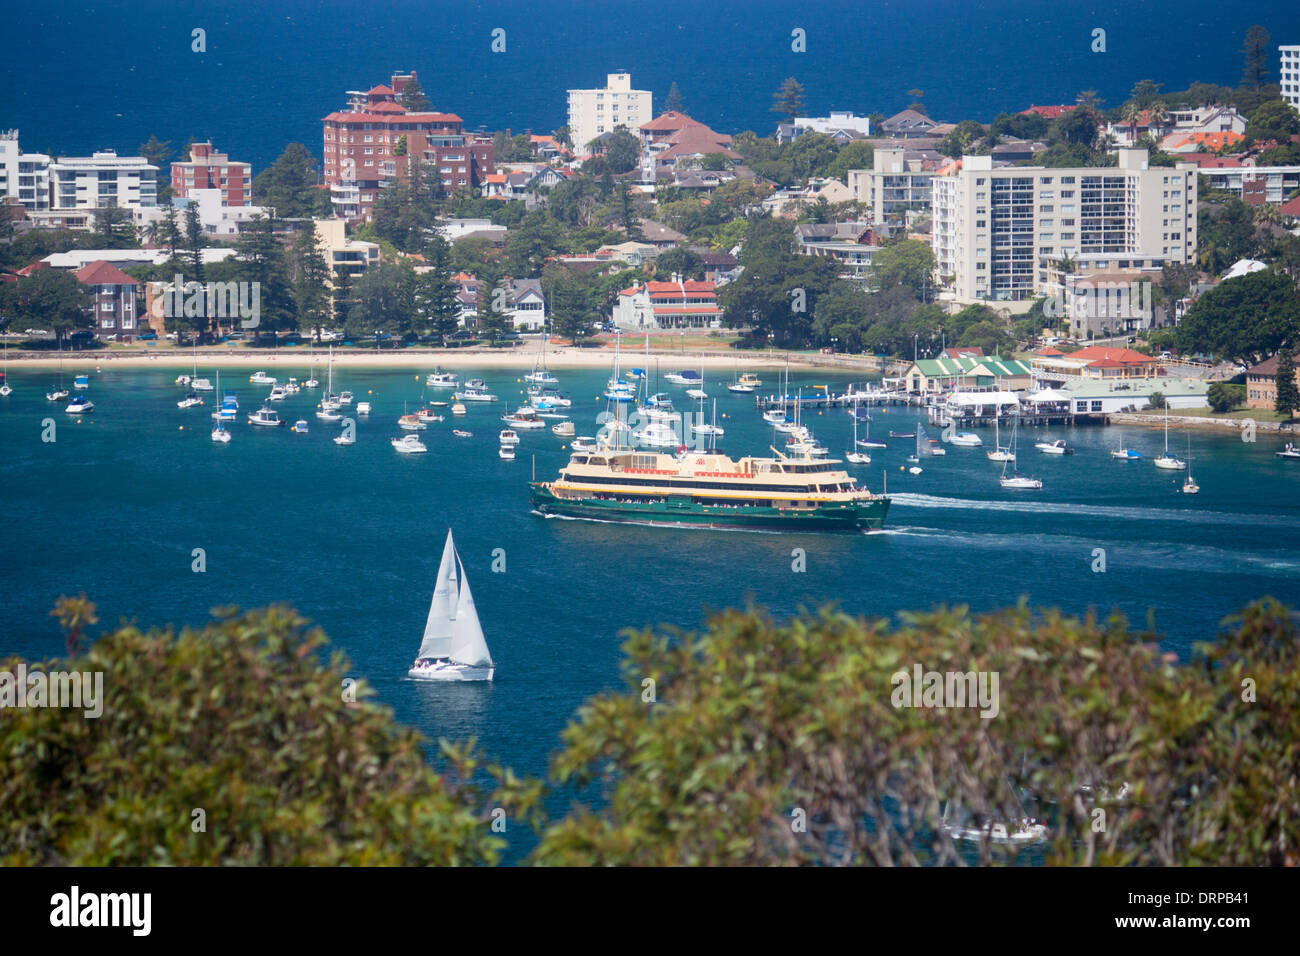 Manly ferry 'Collaroy' approaching wharf at Manly seen from Dobroyd Head North Harbour Sydney New South Wales NSW Australia Stock Photo